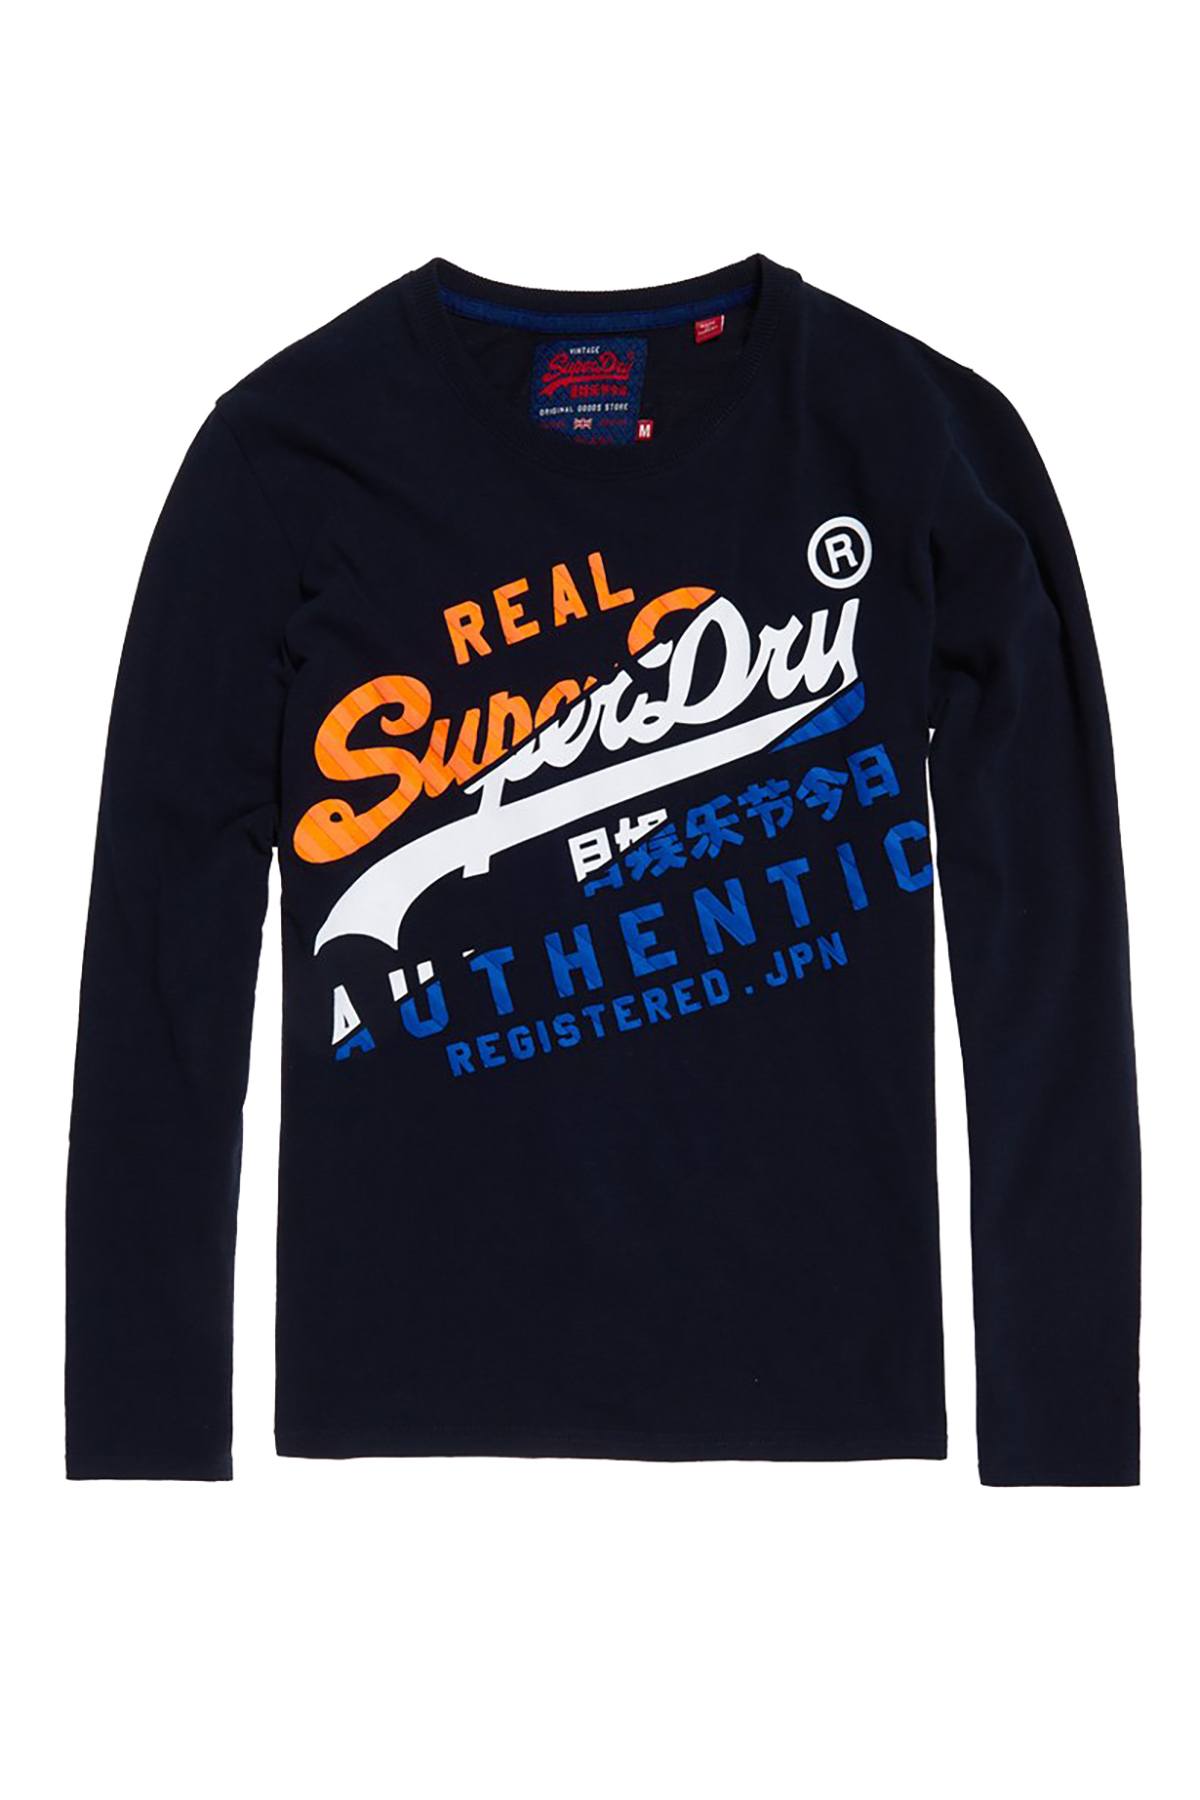 – SuperDry Long-Sleeve XL Eclipse-Navy Authentic CheapUndies T-Shirt Vintage